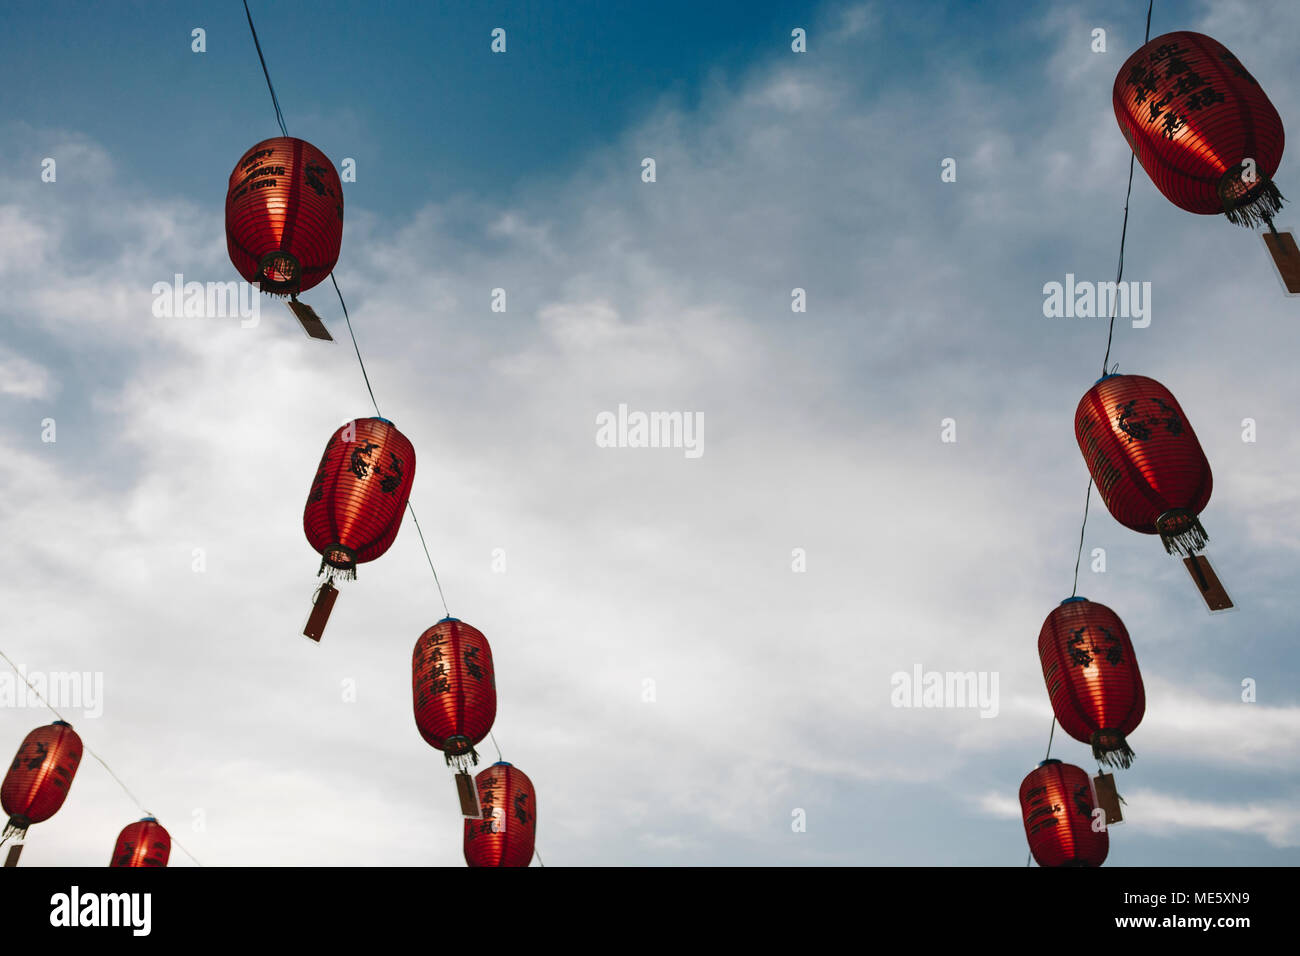 Chinese lanterns in the sky Stock Photo